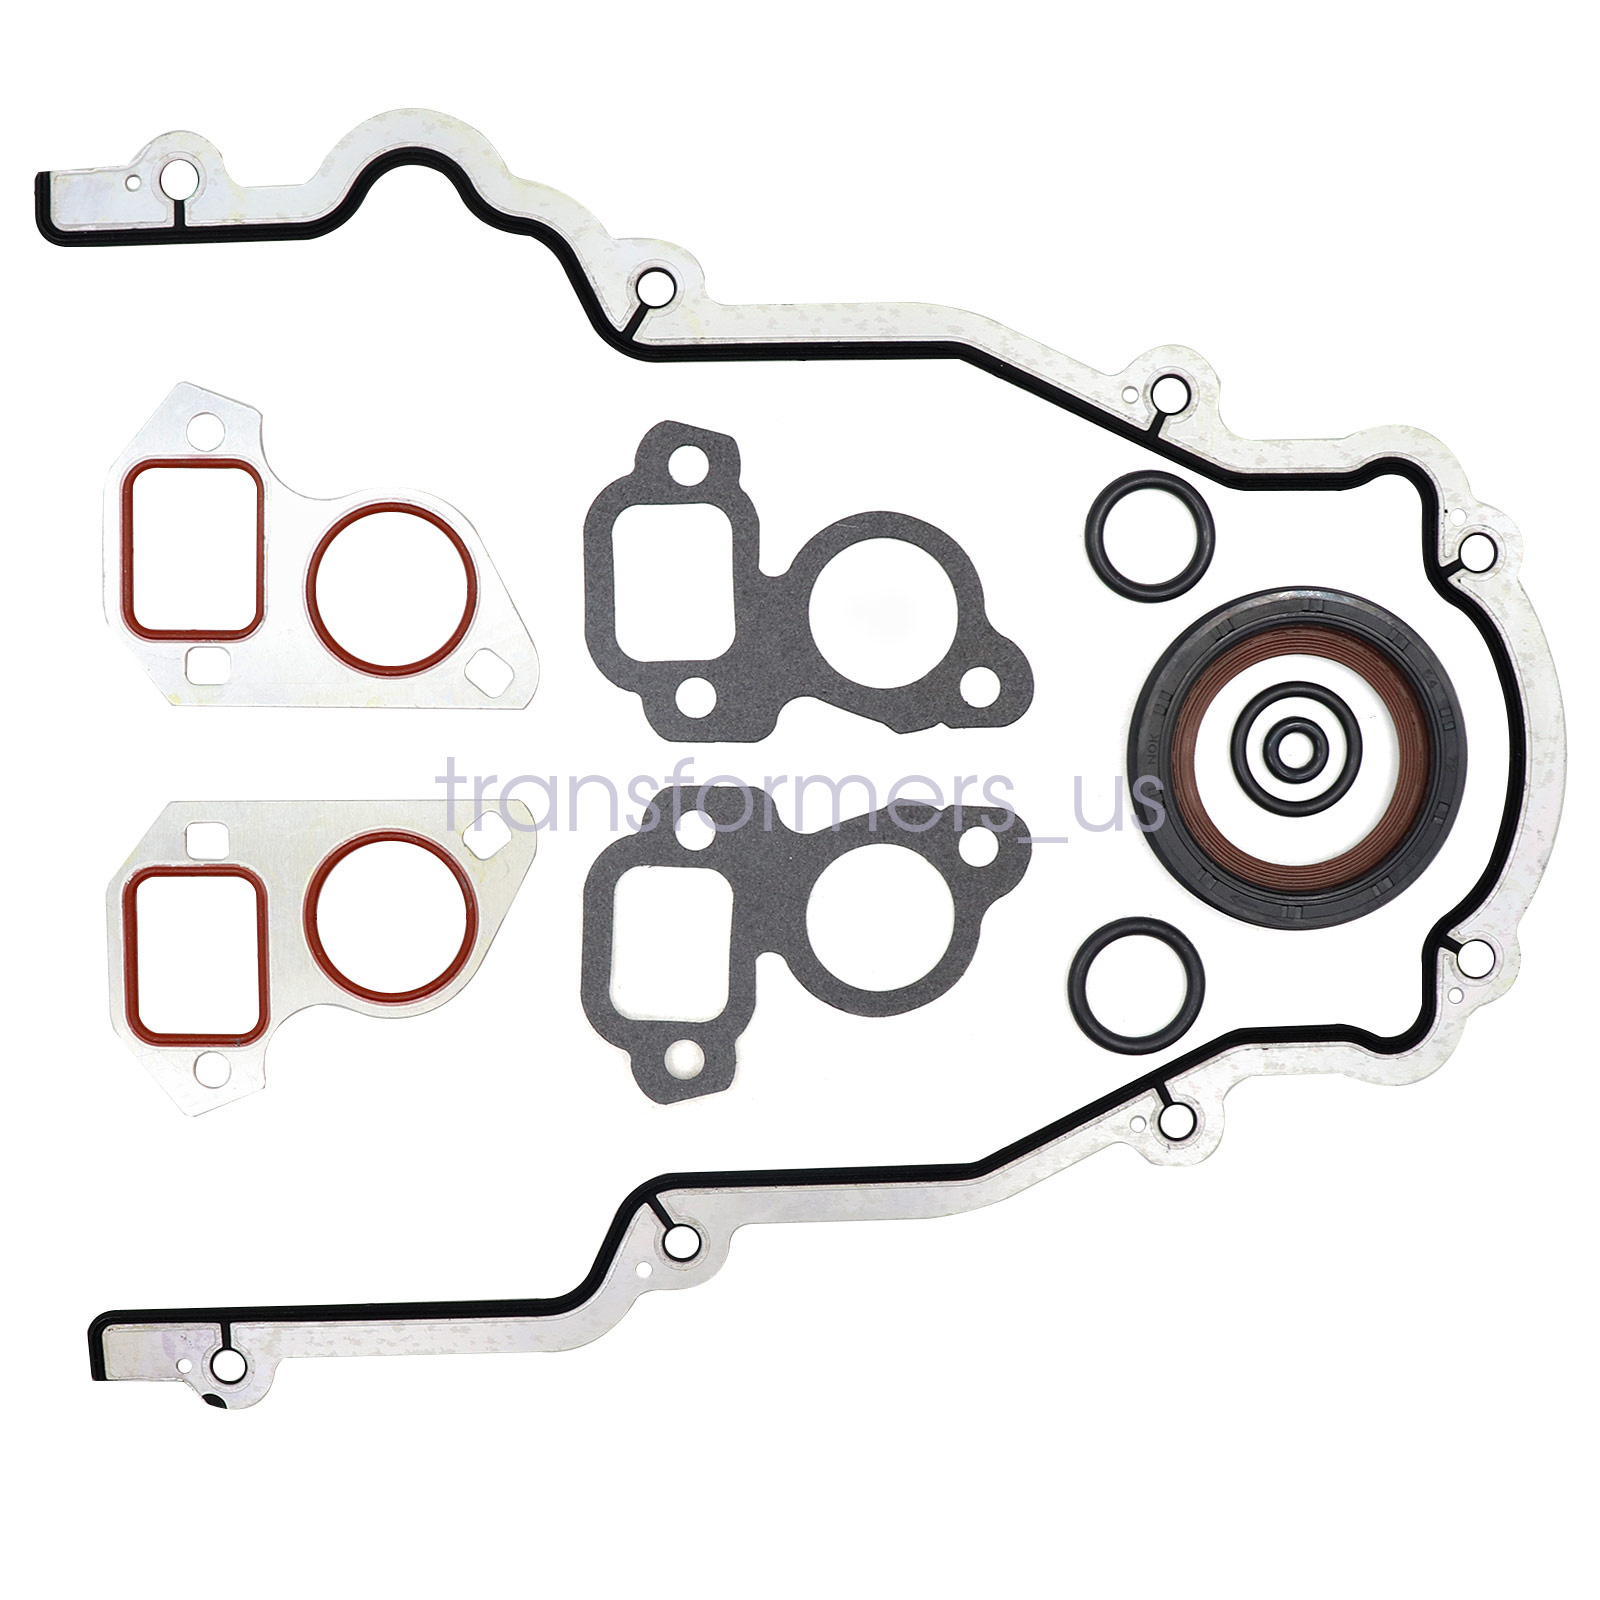 New Rear Cover Plate Gasket & Rear Main Seal For GM LS1 